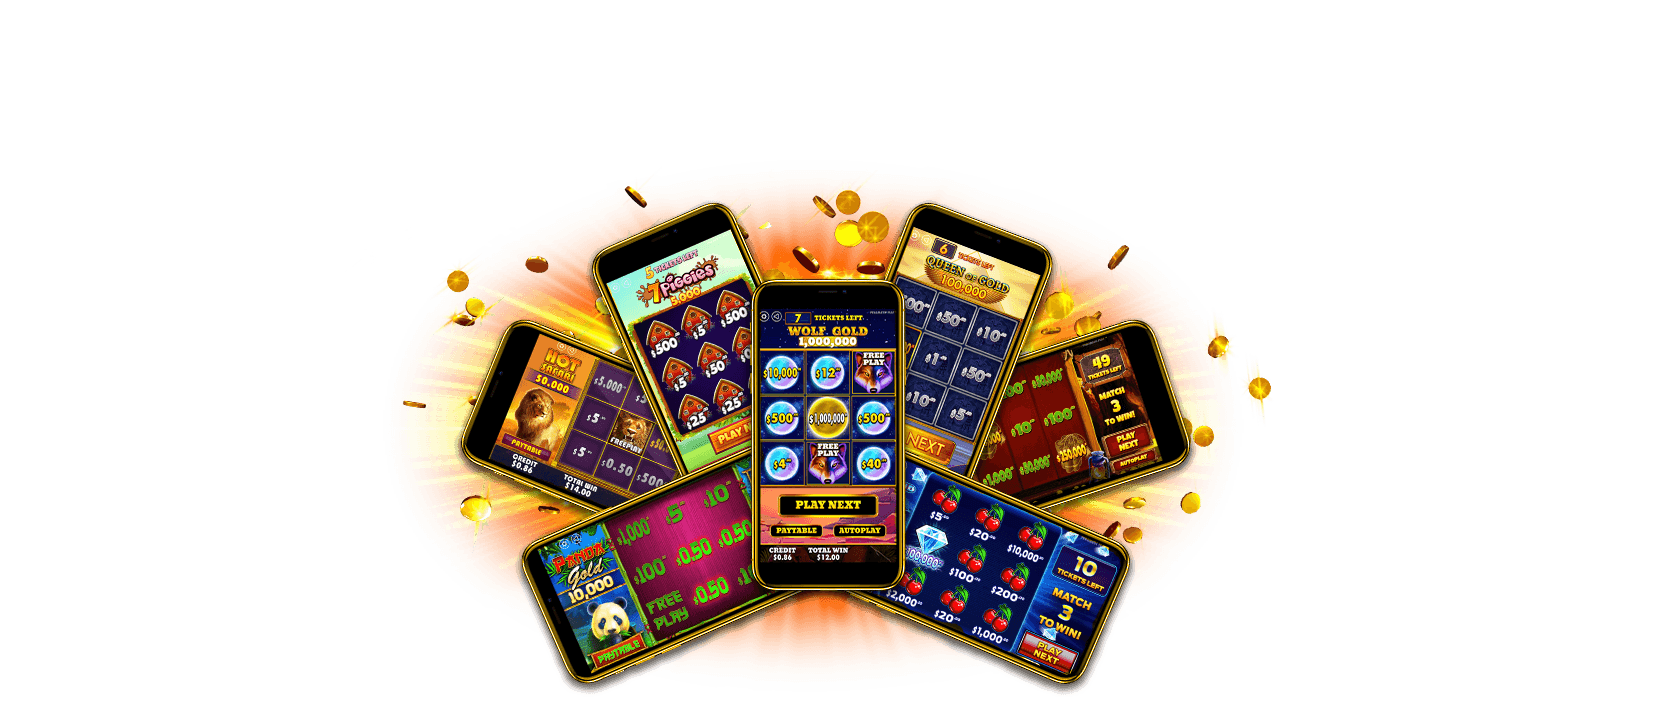 Mobile Slots Machines What You Need To Know About Mobile Slots - Mobile Slot Game